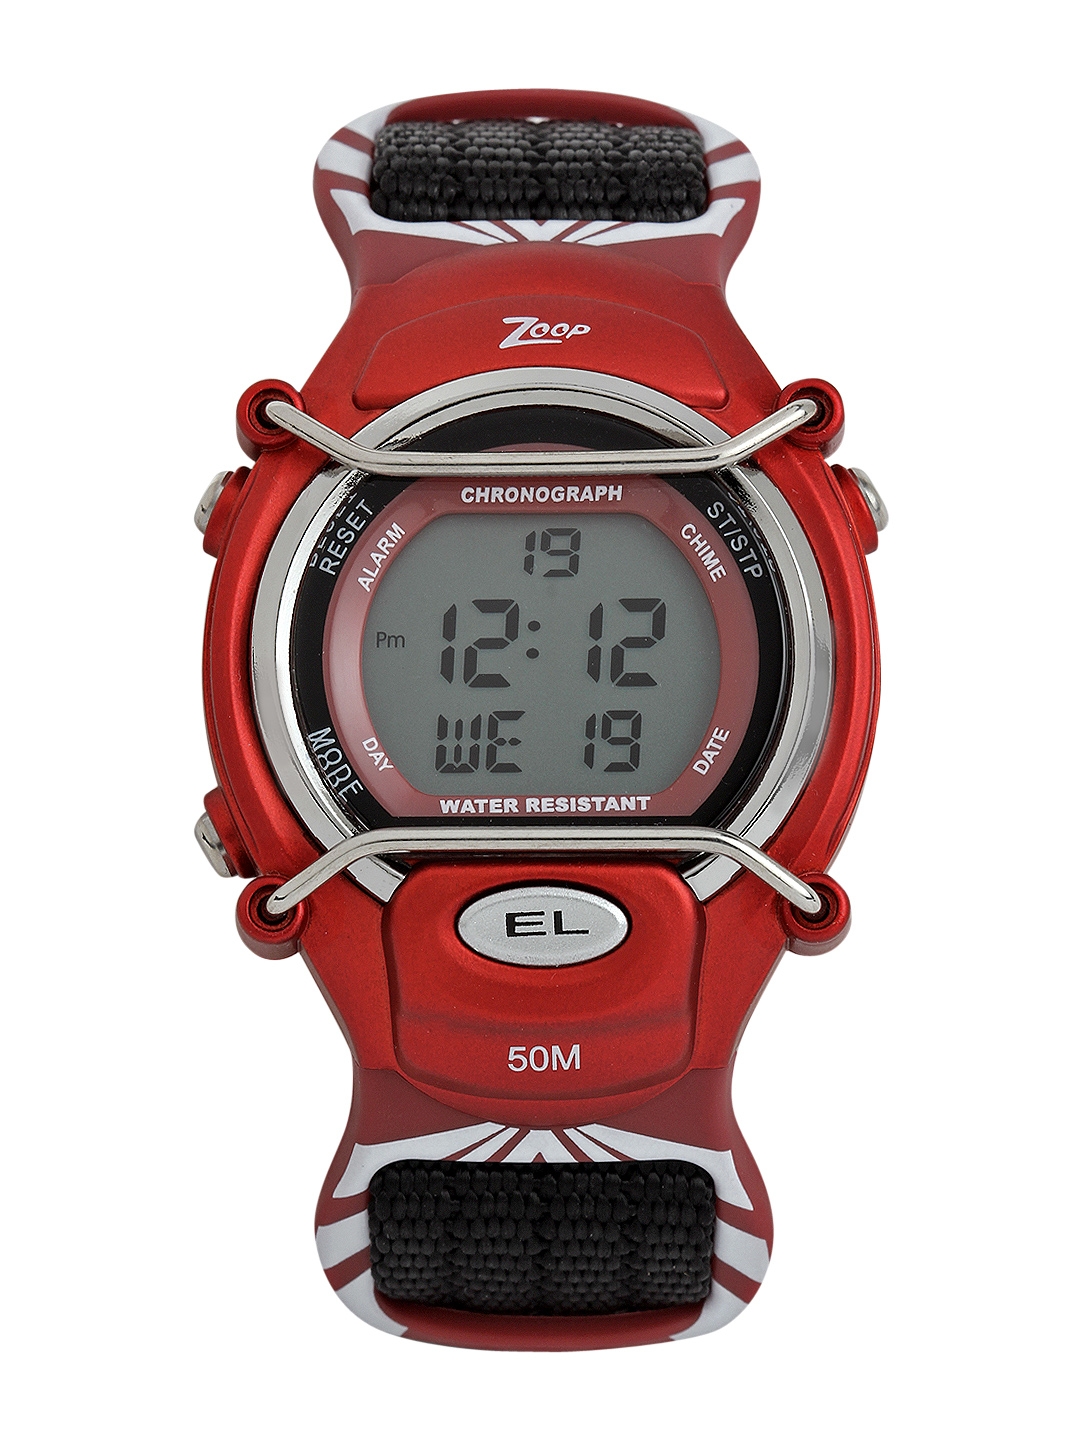 Buy Zoop Watches for kids online at the Best Price | Titan-hanic.com.vn